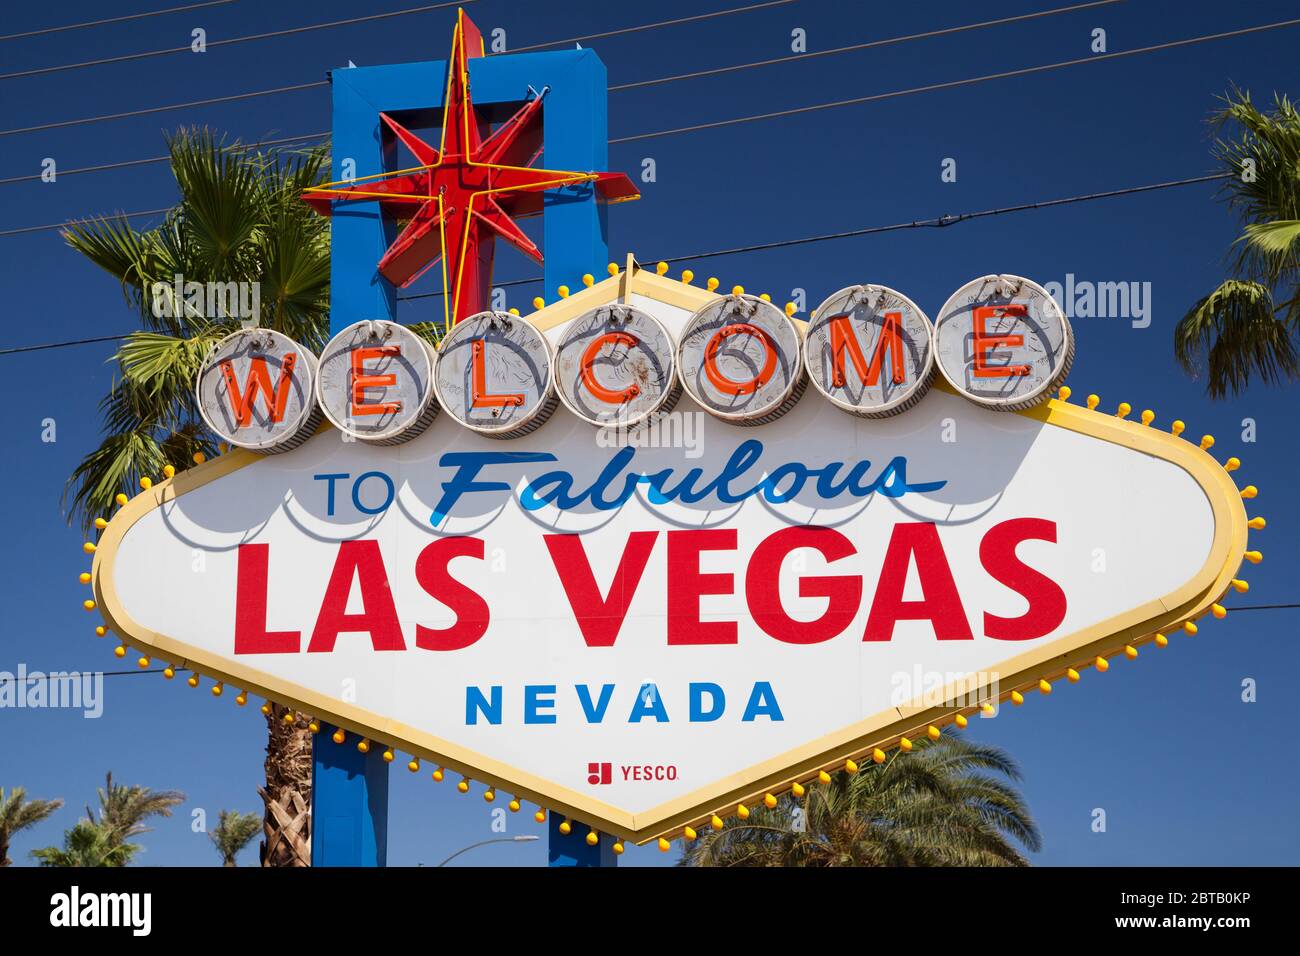 Las Vegas, Nevada - August 30, 2019: The famous 'Welcome to Fabulous Las Vegas' sign in Las Vegas, Nevada, United States. Stock Photo